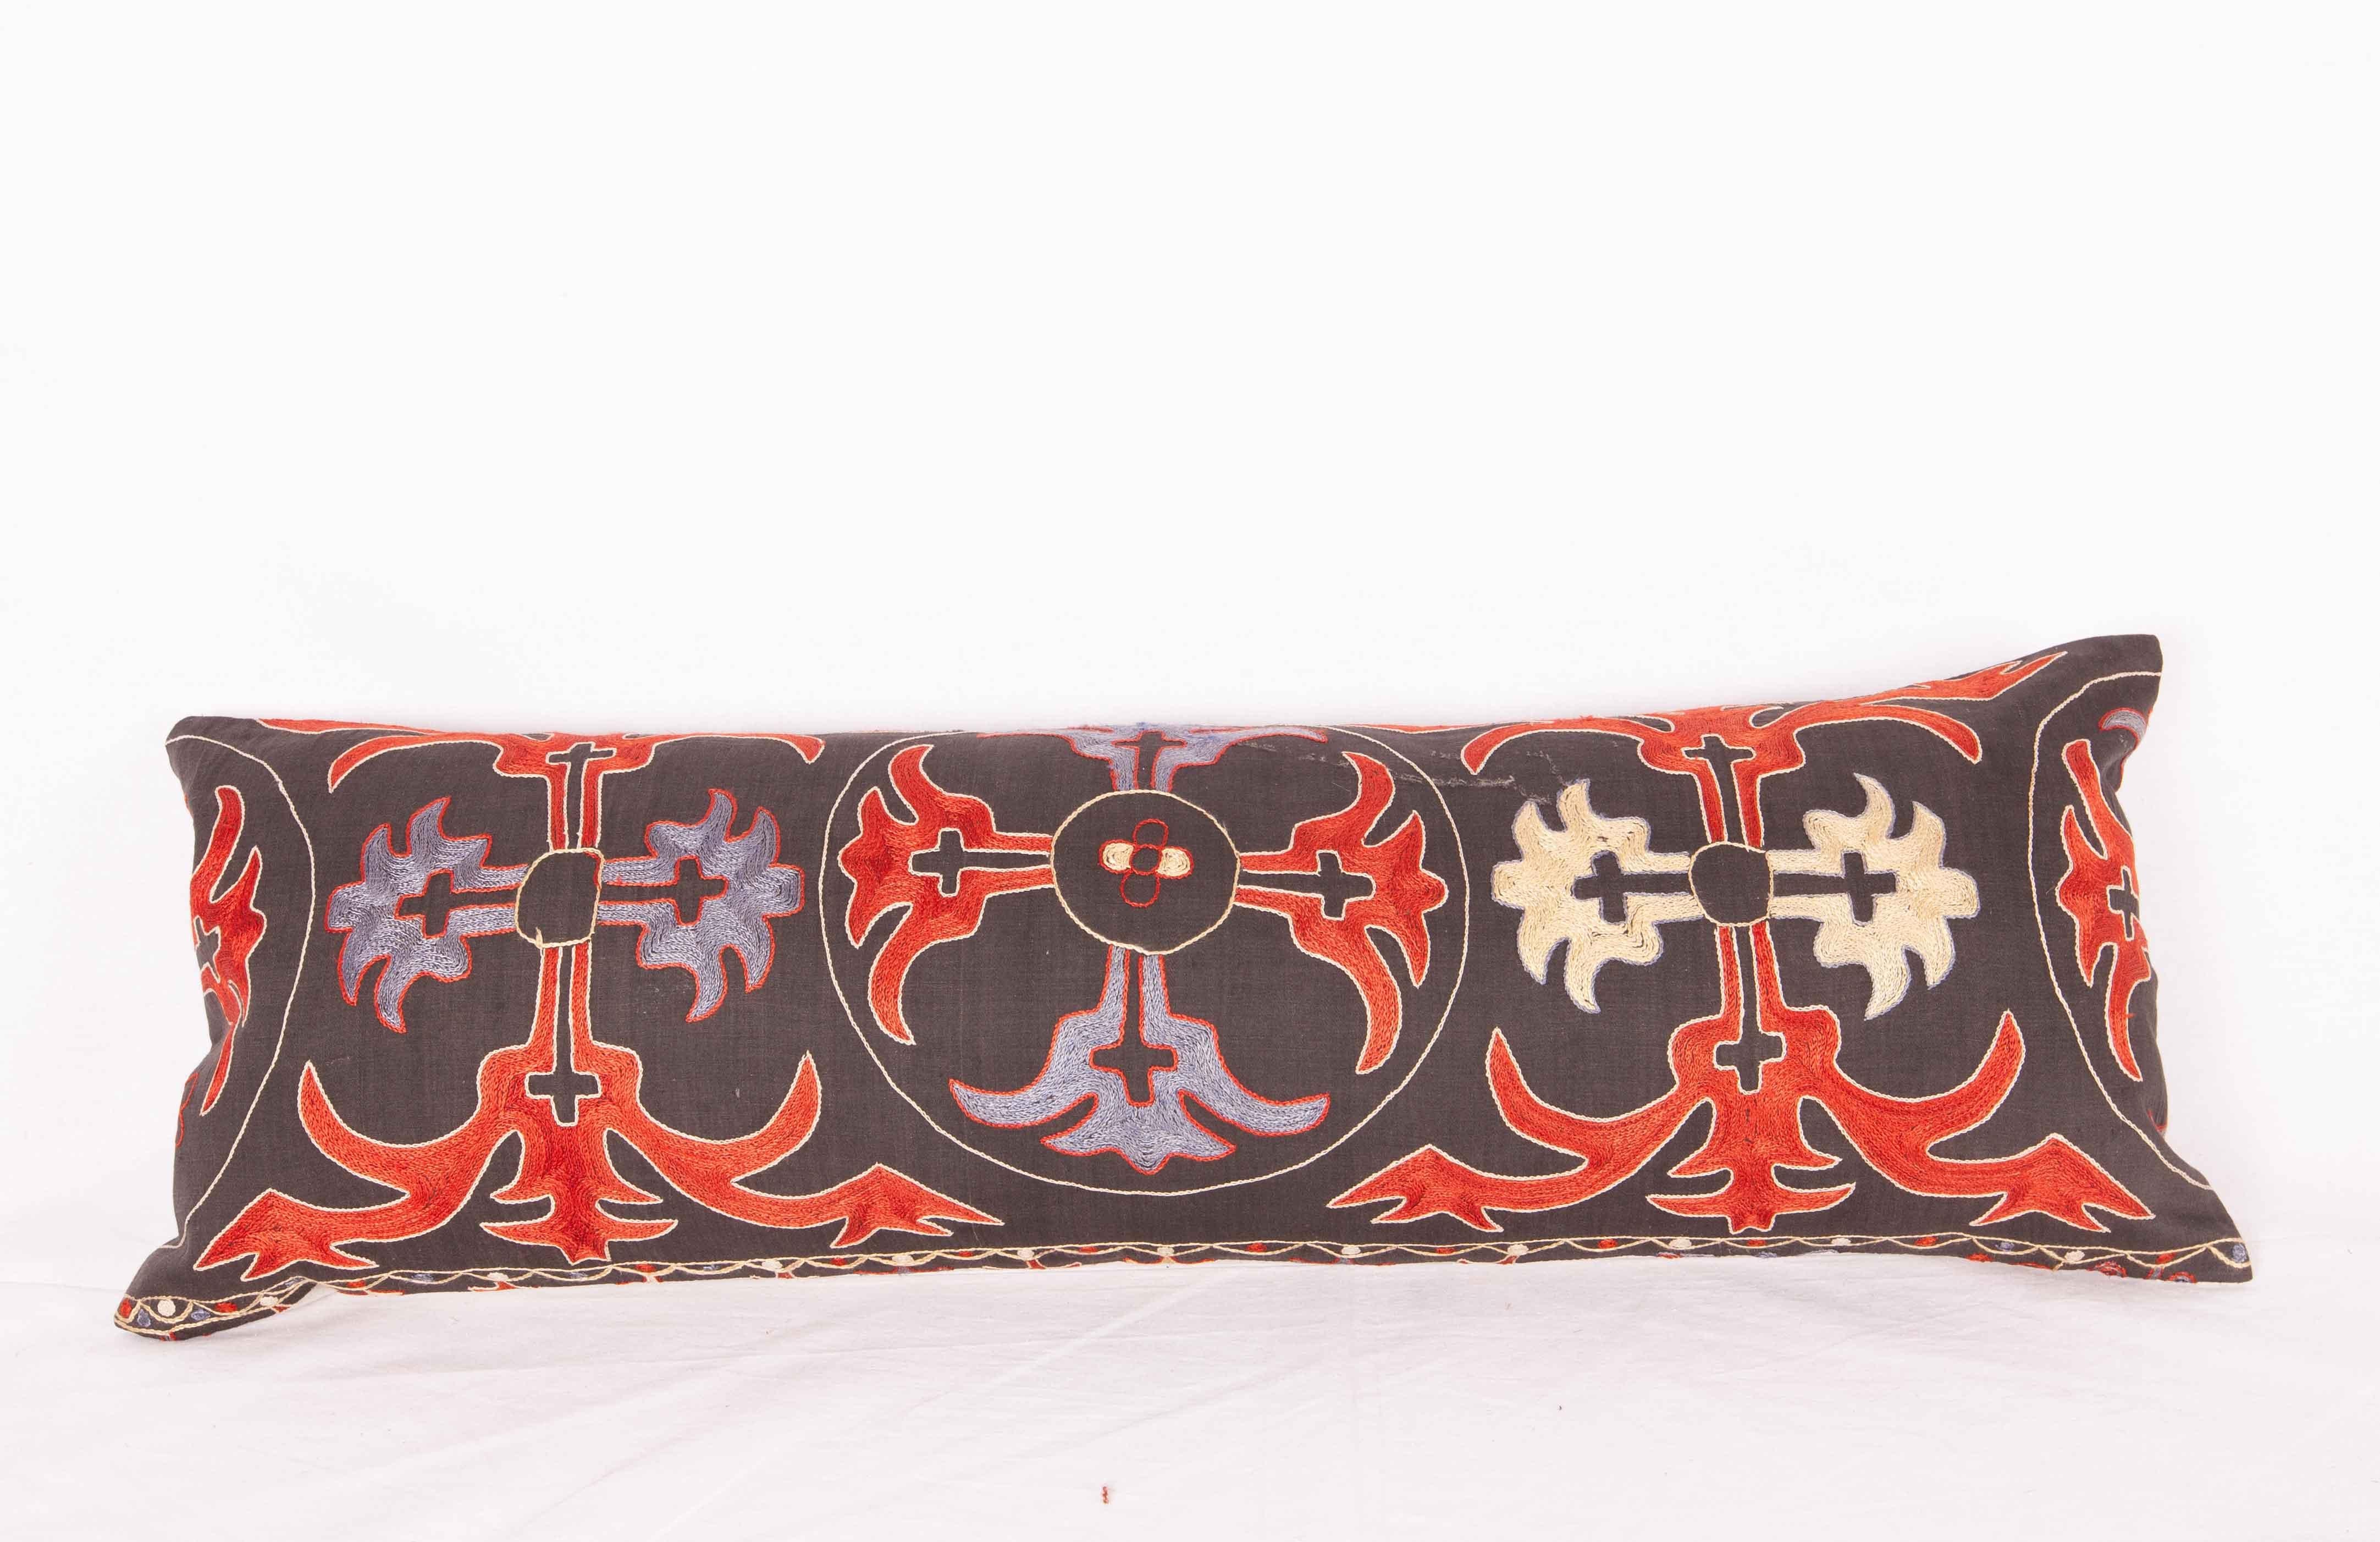 Pillow cases are made from a mid 20th century Kazak or Kyrgyz Tush Kyz embroidery . They do not come with  inserts but  come with a bags made to the size  from  cotton fabric to accommodate the filling materials.  Backing is linen. Please note